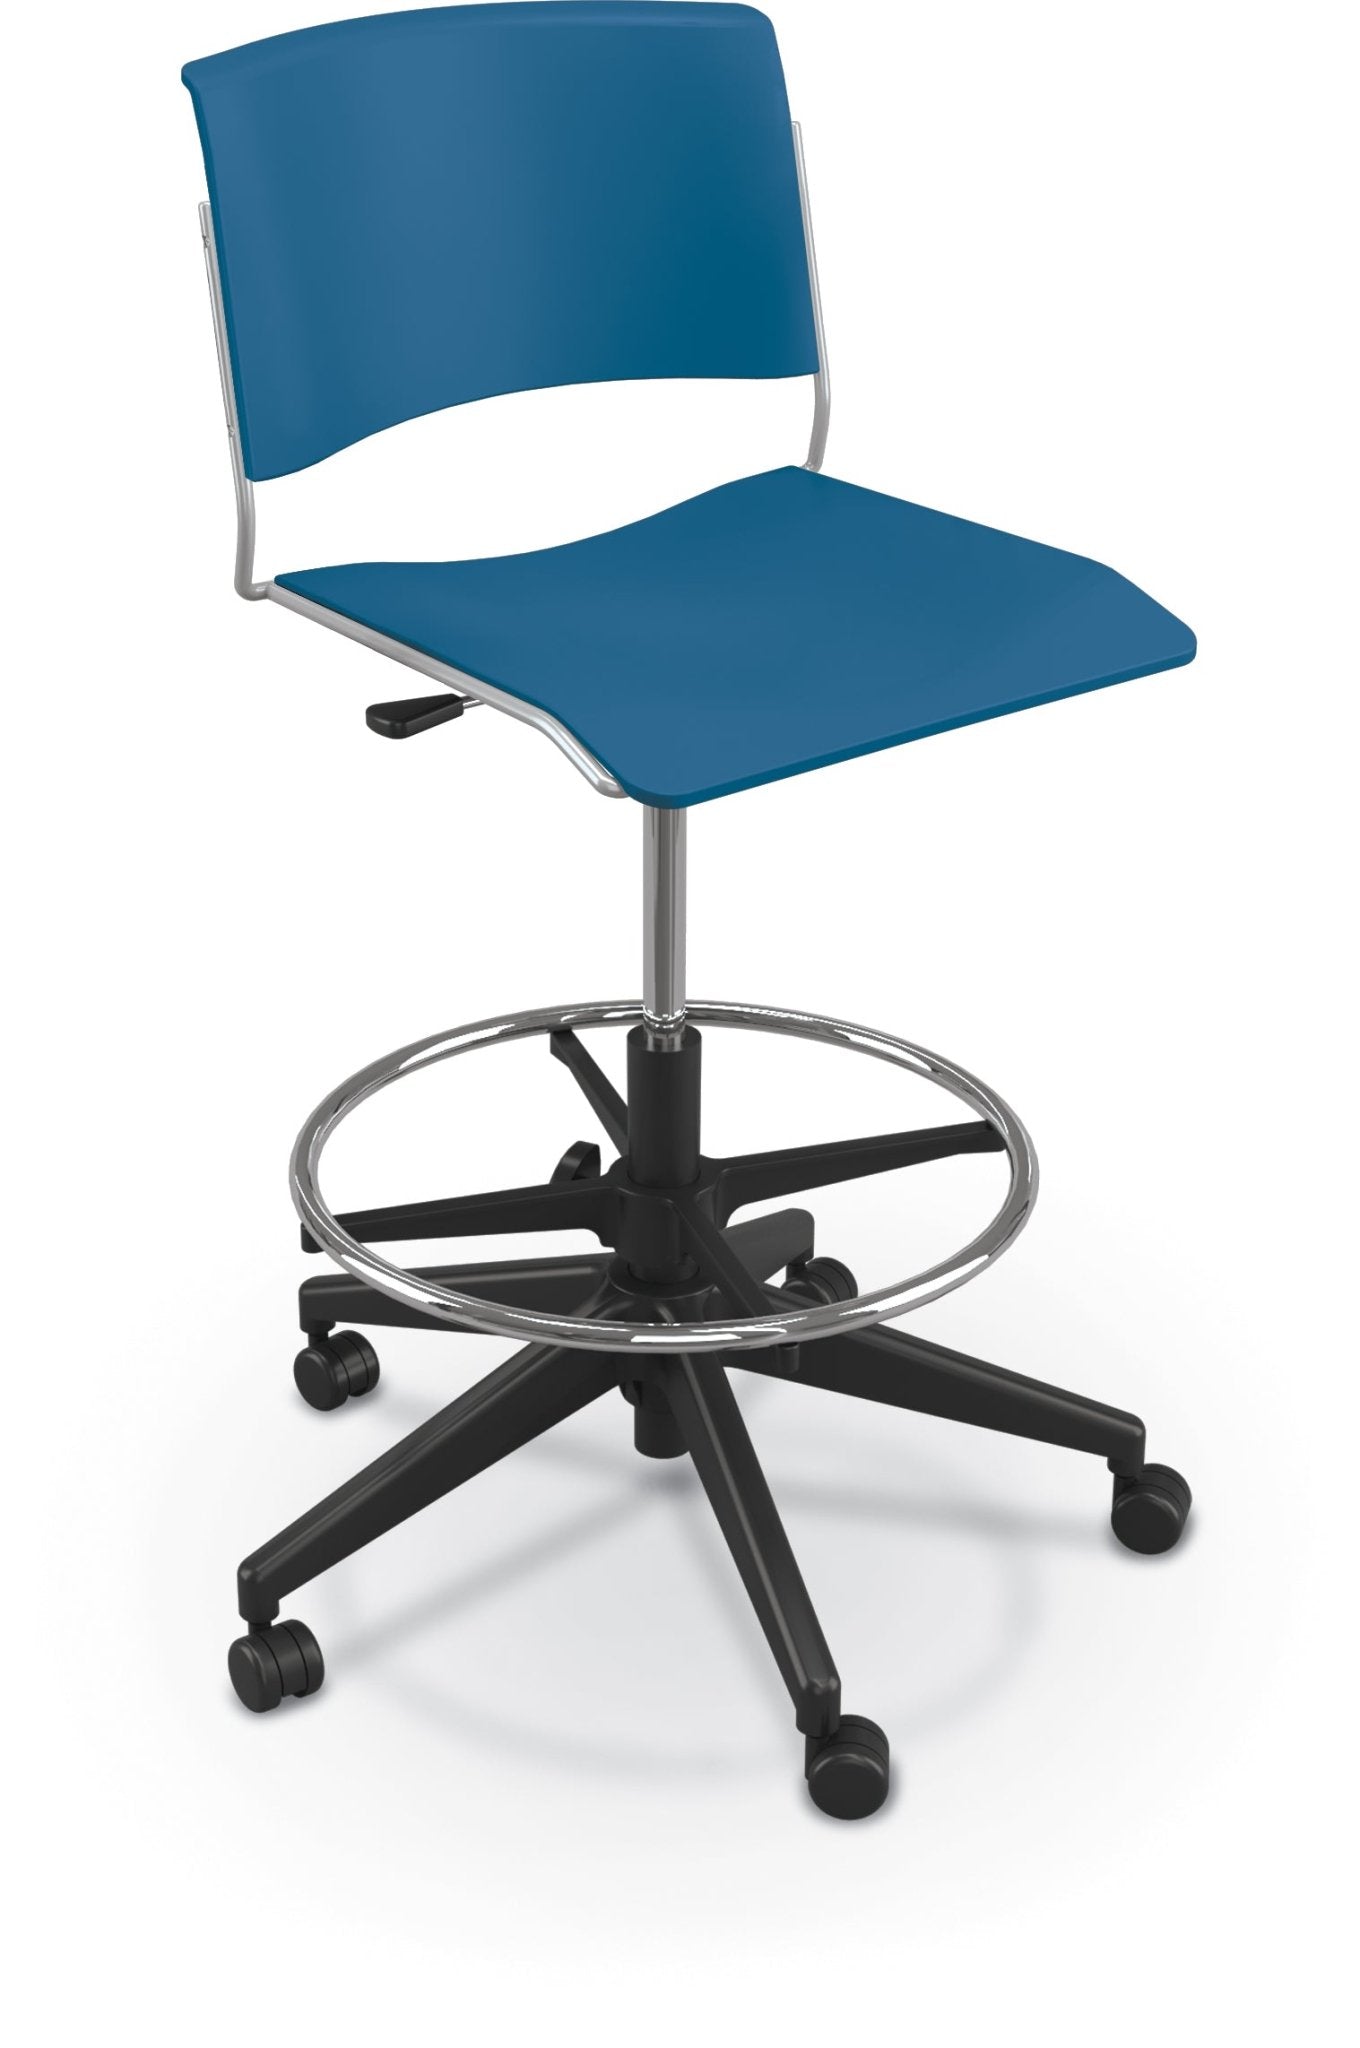 Mooreco Akt 5-Star Stool - Seat Adjusts from 23.5" to 30.5" - SchoolOutlet